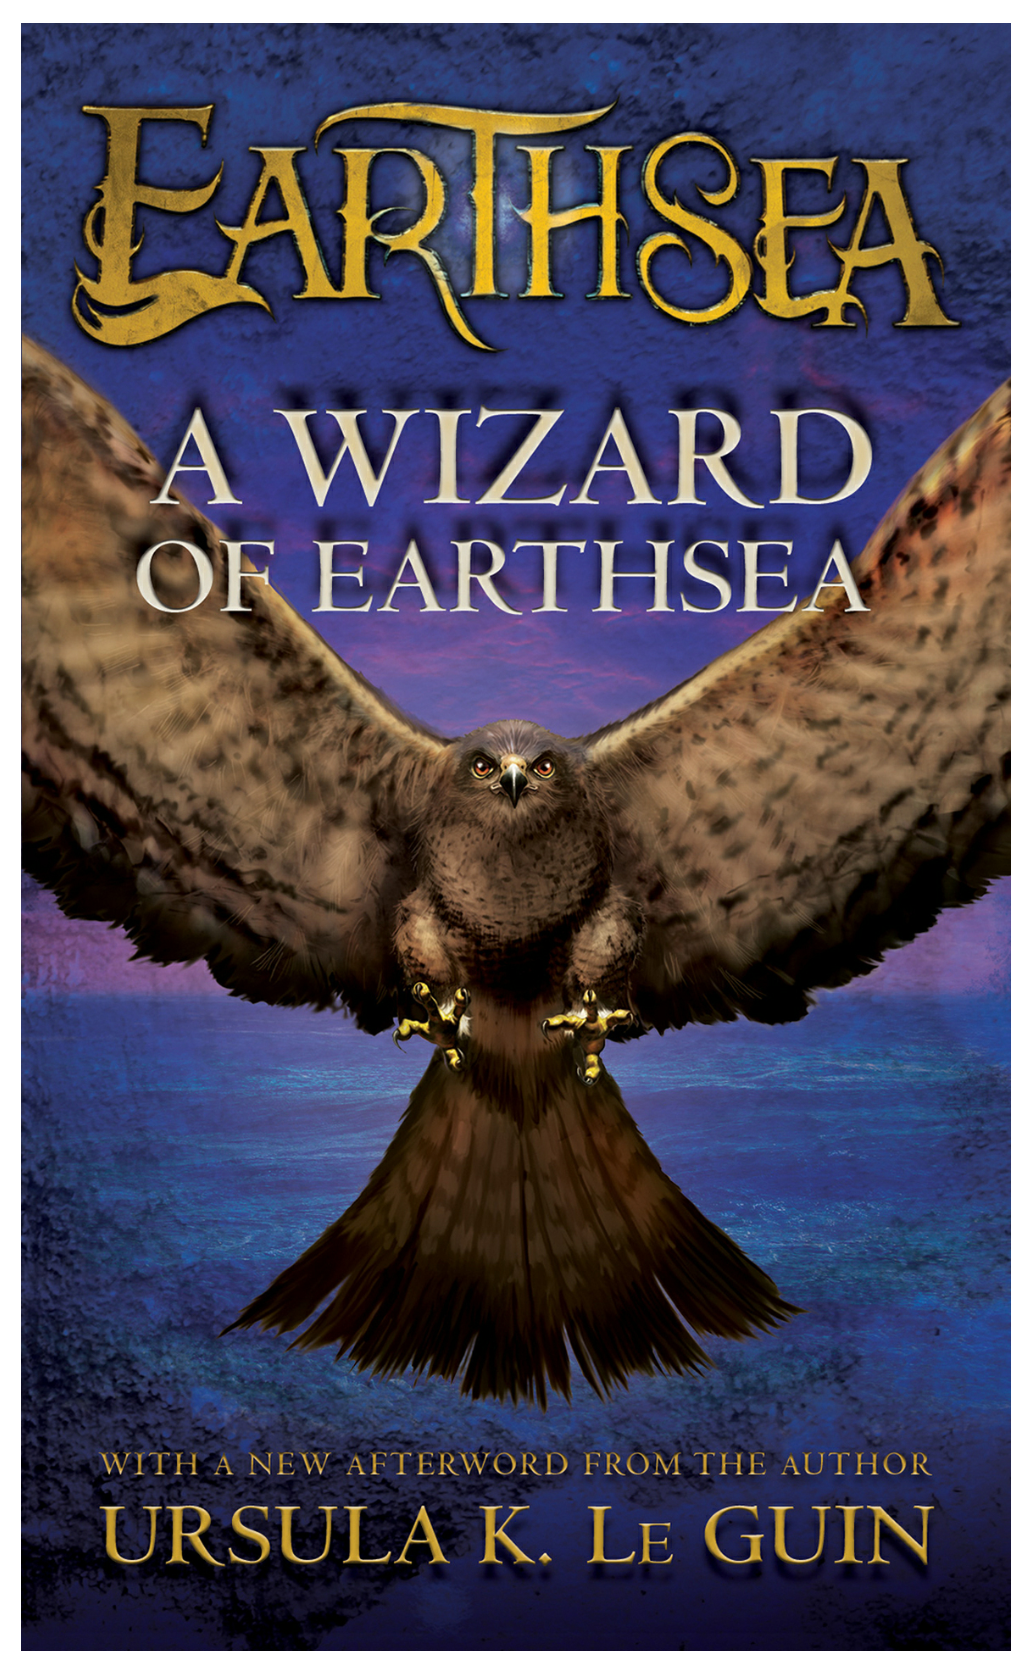 Image of the book cover "A Wizard of Earthsea" featuring an eagle with its wings open and talons ready to grasp flying over the sea. 